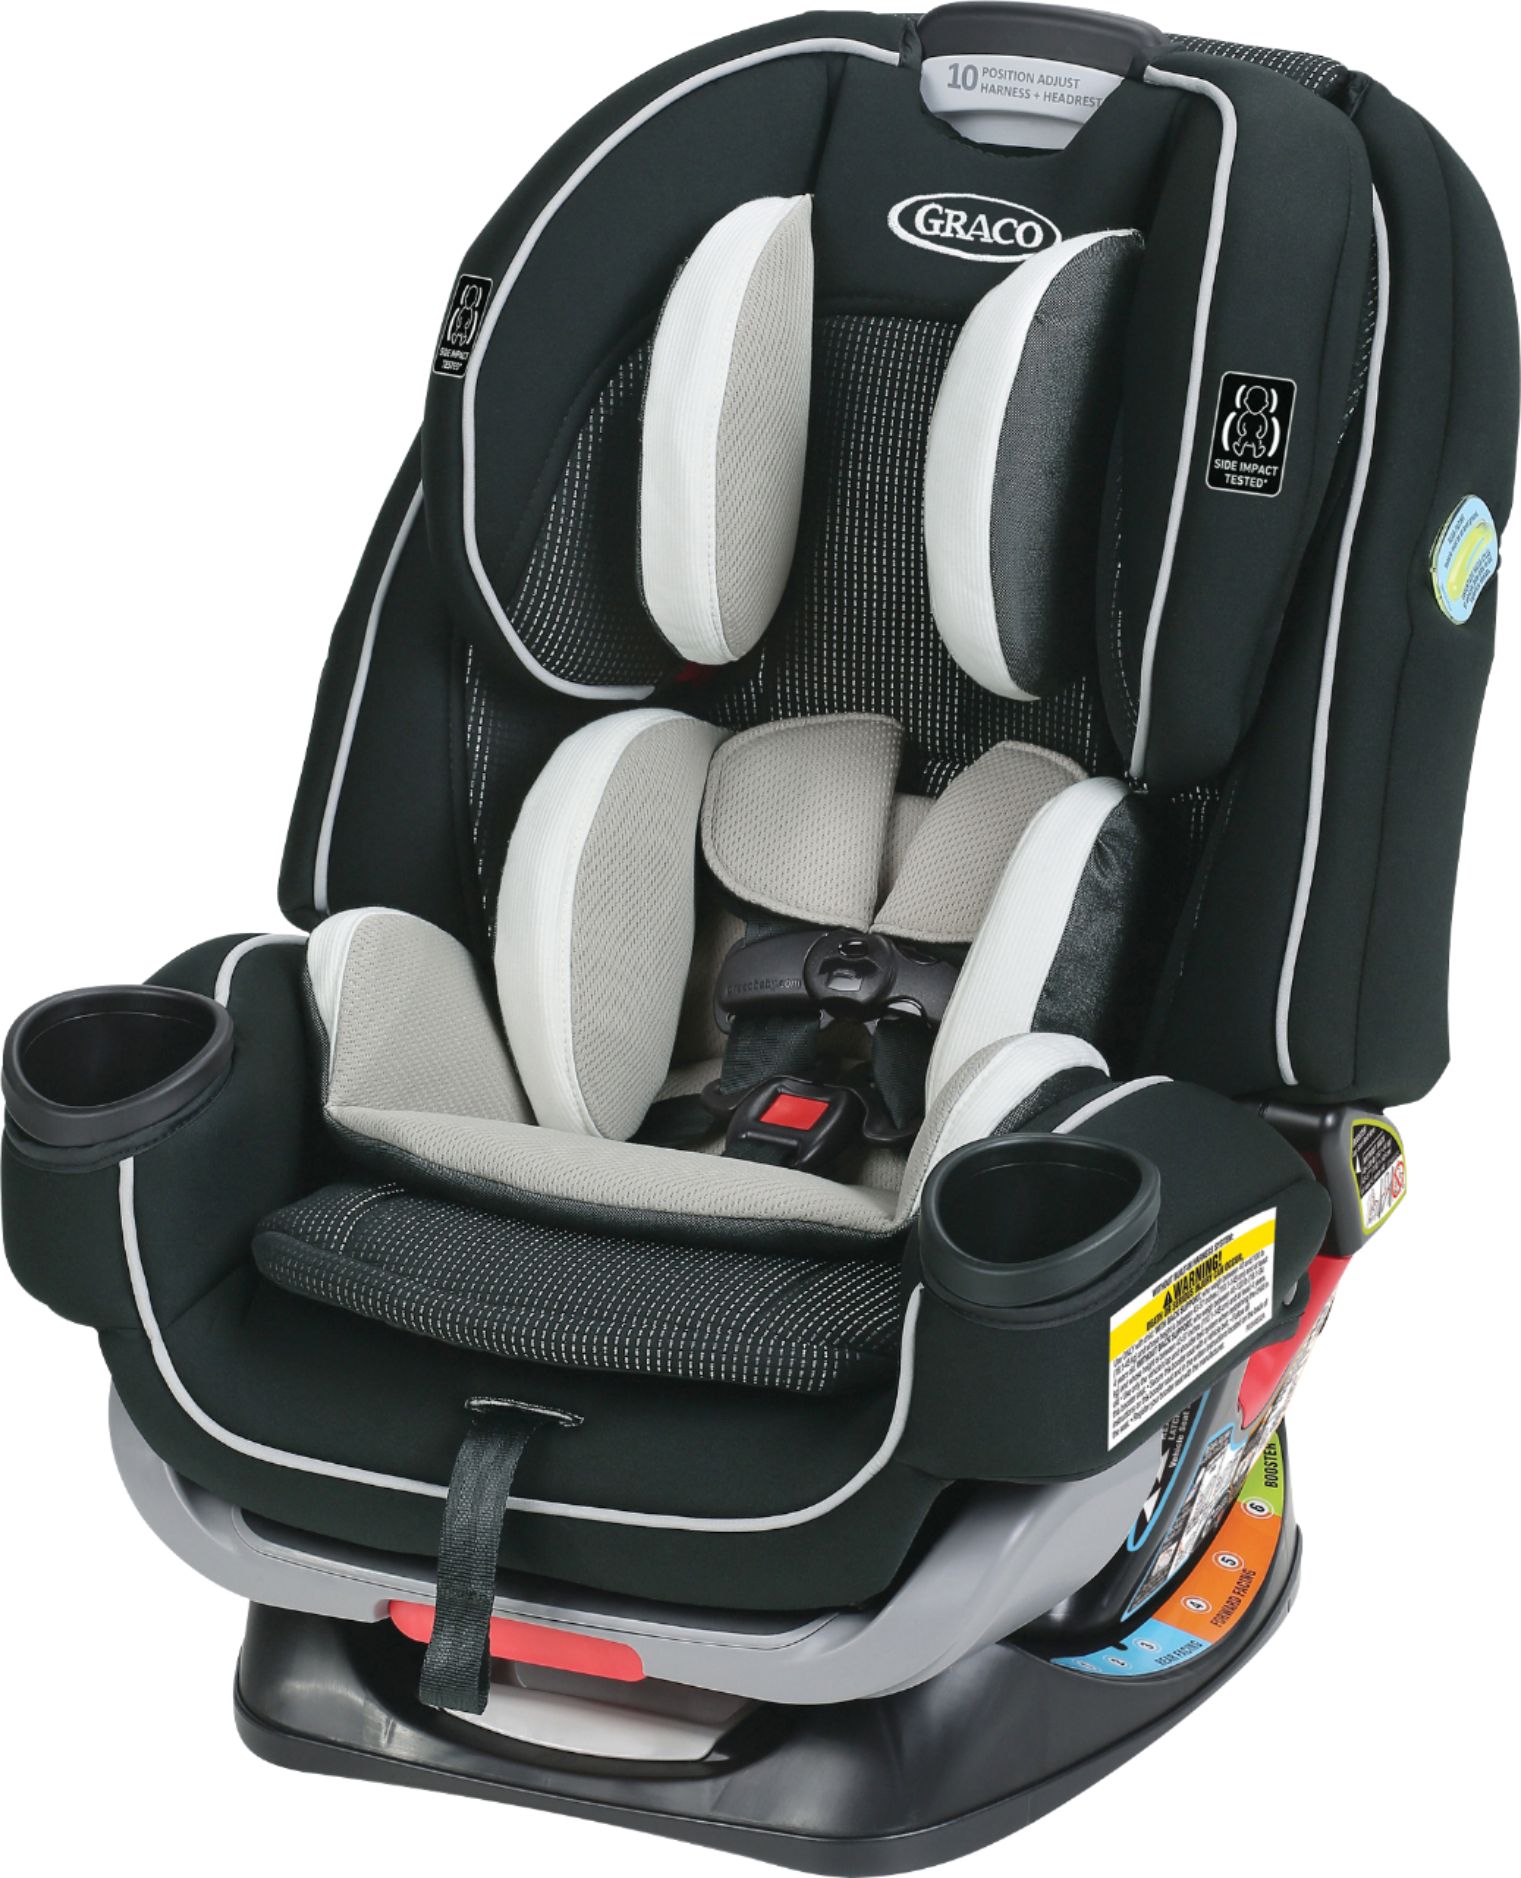 Left View: Graco - TurboBooster Grow Highback Booster with RightGuide Seat Belt Trainer - West Point